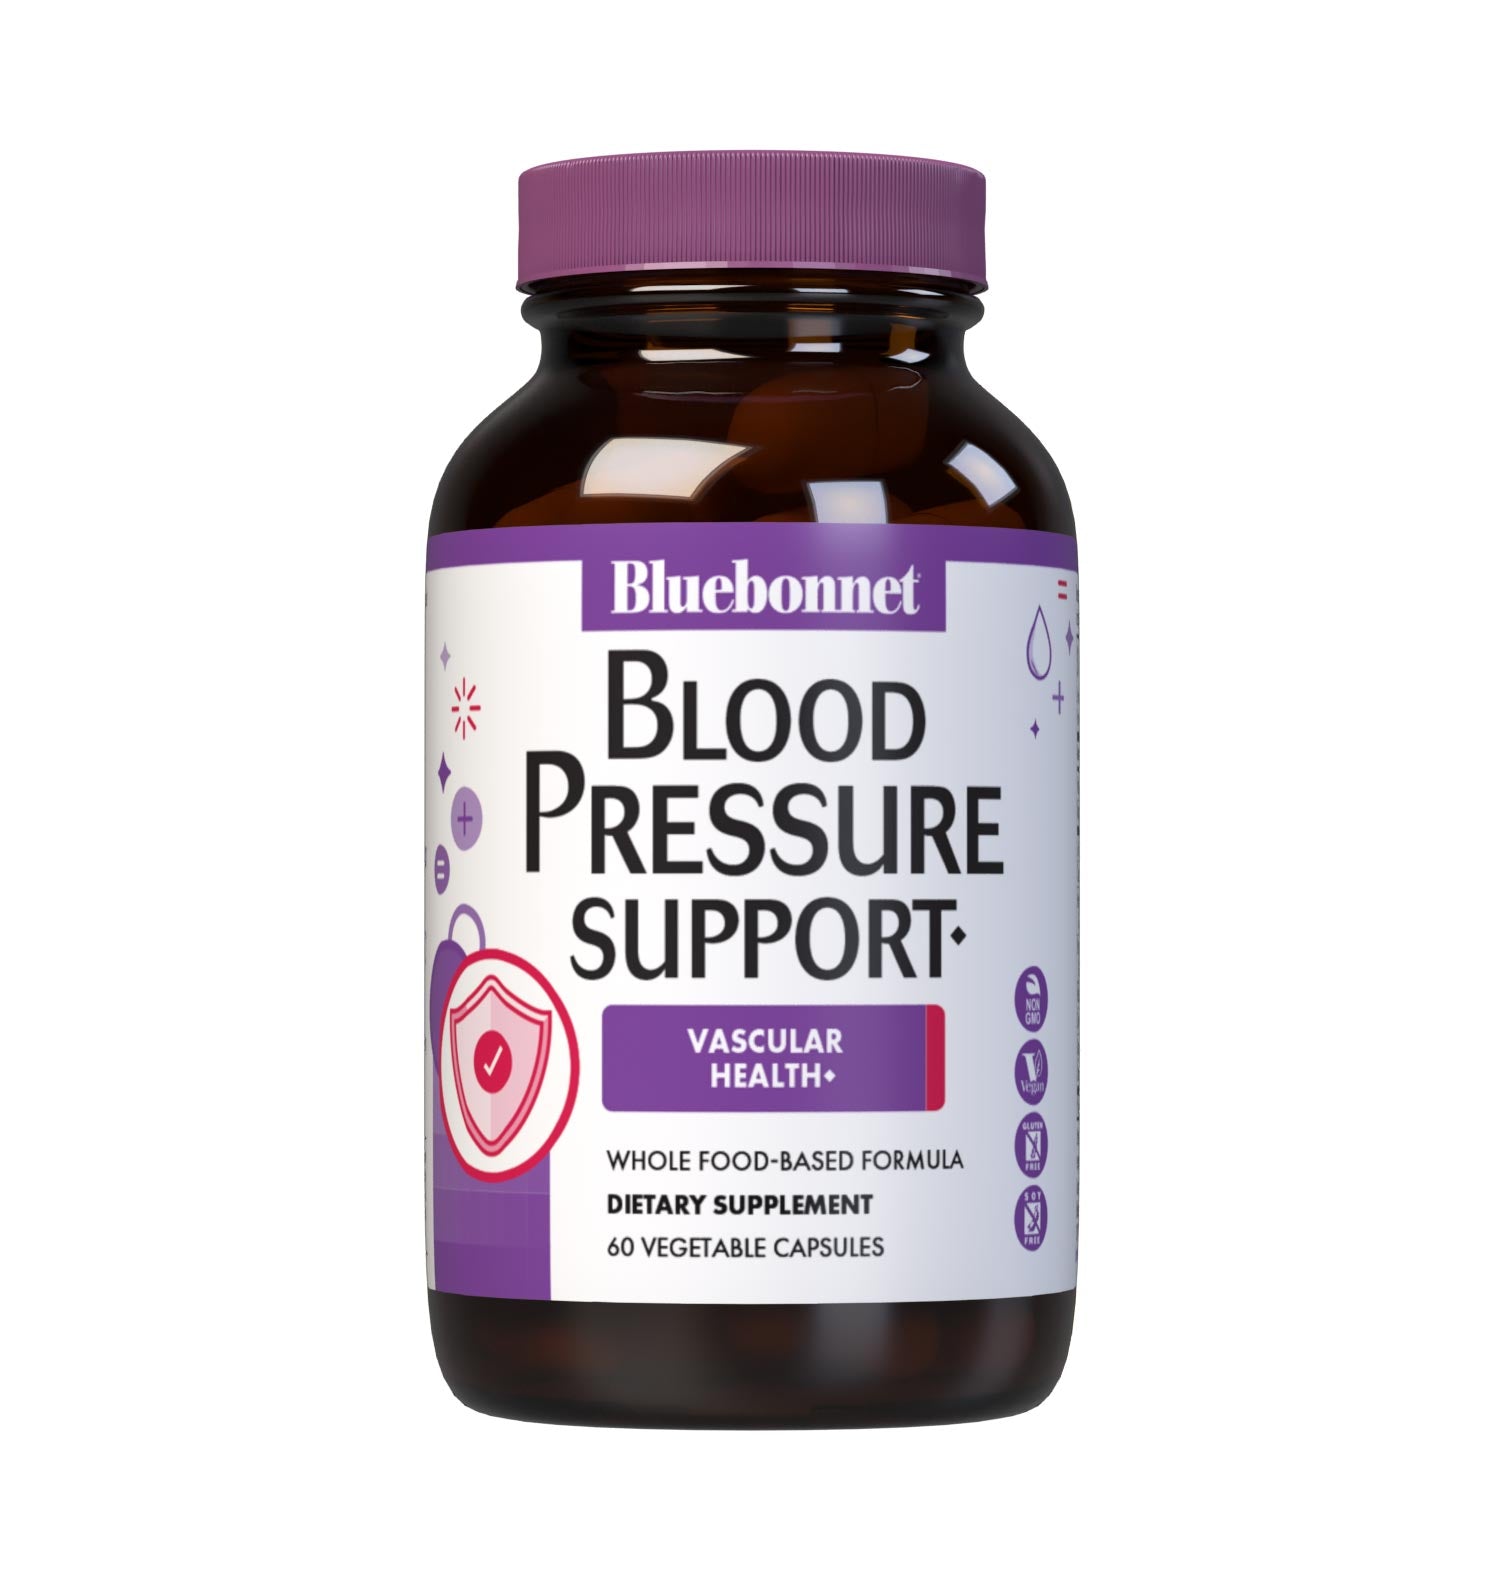 Bluebonnet’s Targeted Choice Blood Pressure Support 60 Vegetable Capsules are specially formulated with a unique blend of sustainably harvested or wildcrafted herbal/botanical extracts, the amino acids arginine and taurine, along with grape seed extract and CoQ10 to help support blood pressure levels that are already within the normal range. #size_60 count